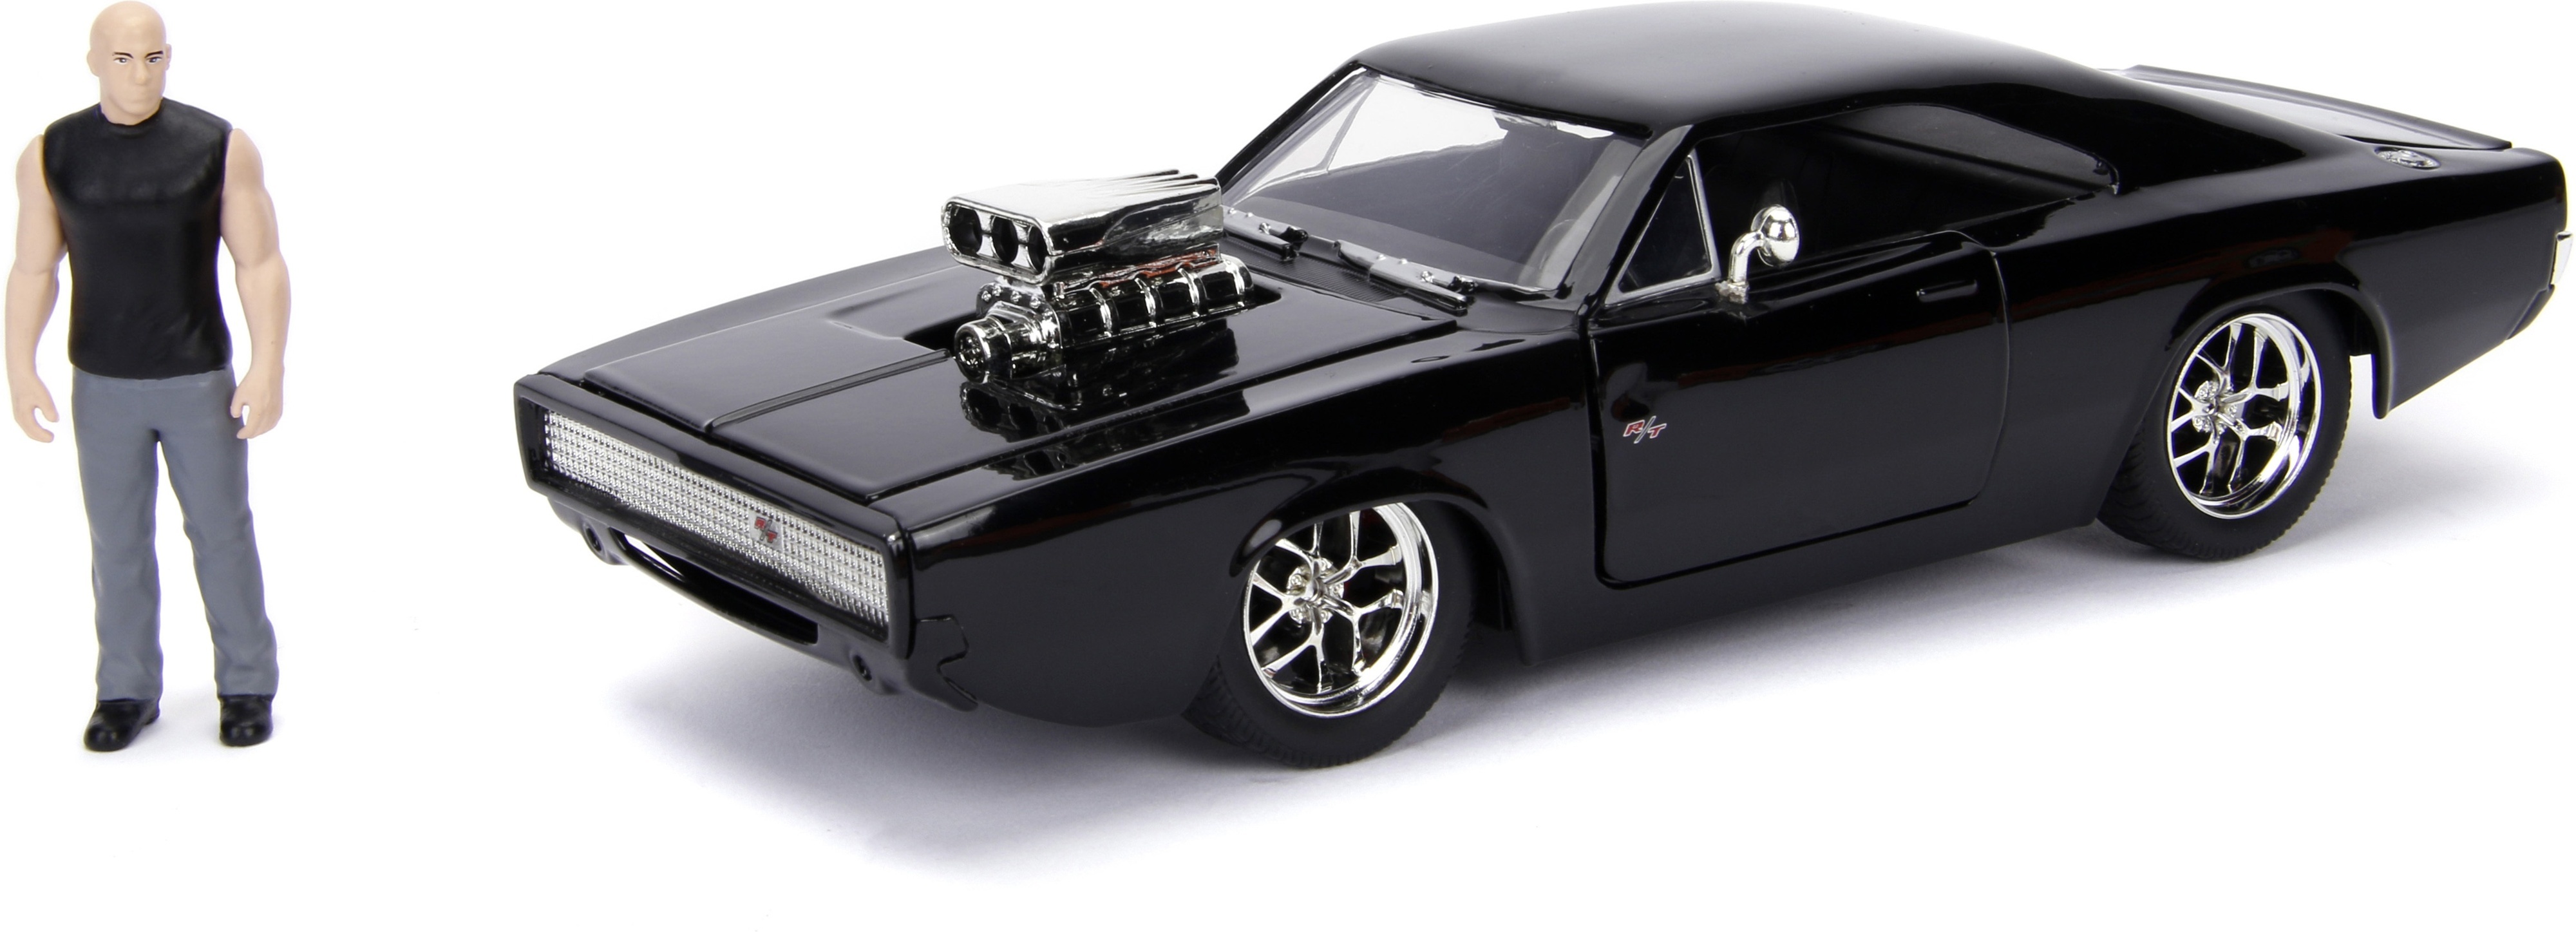 Dodge Charger r/t 1970 Jada Toys 1/24 (fast and Furious) - с